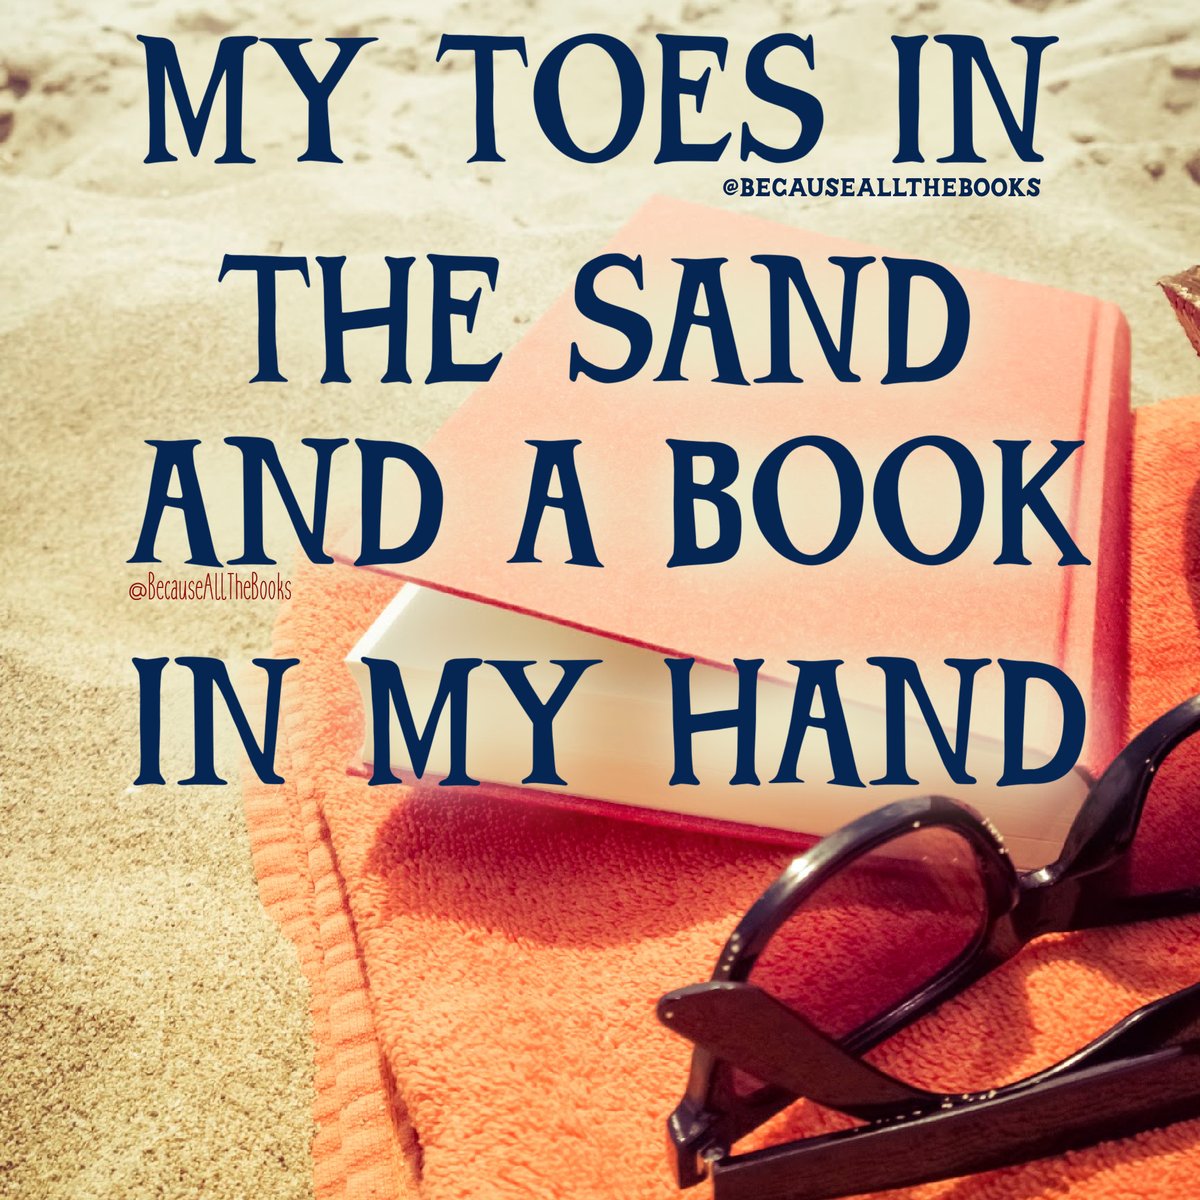 Two things I seriously need right now!

#BecauseAllTheBooks #BeachRead #BeachReads #BeachReading #VacationReading